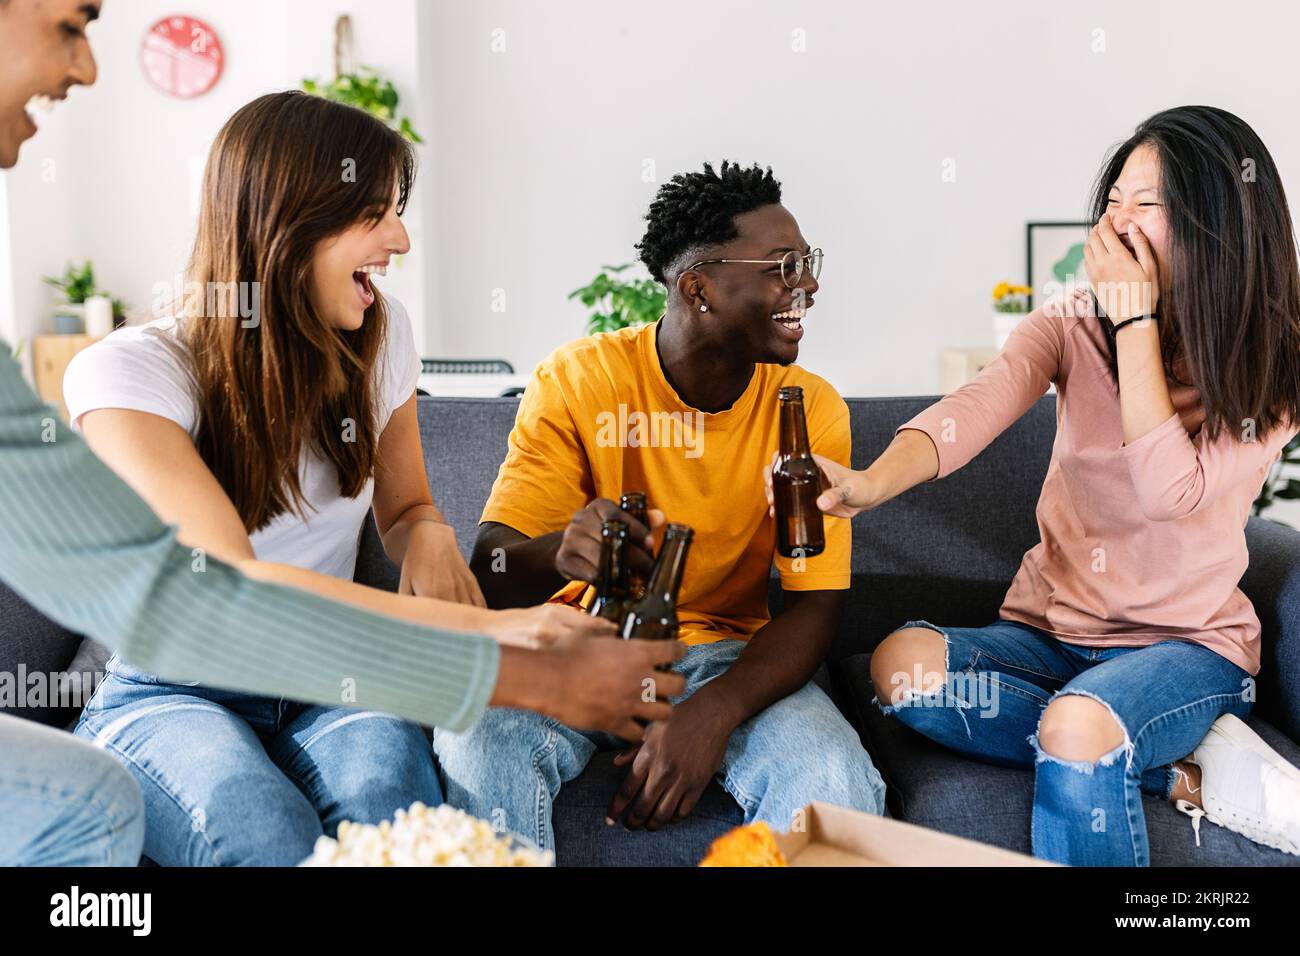 Group of young multiracial happy friends hanging out at home Stock Photo